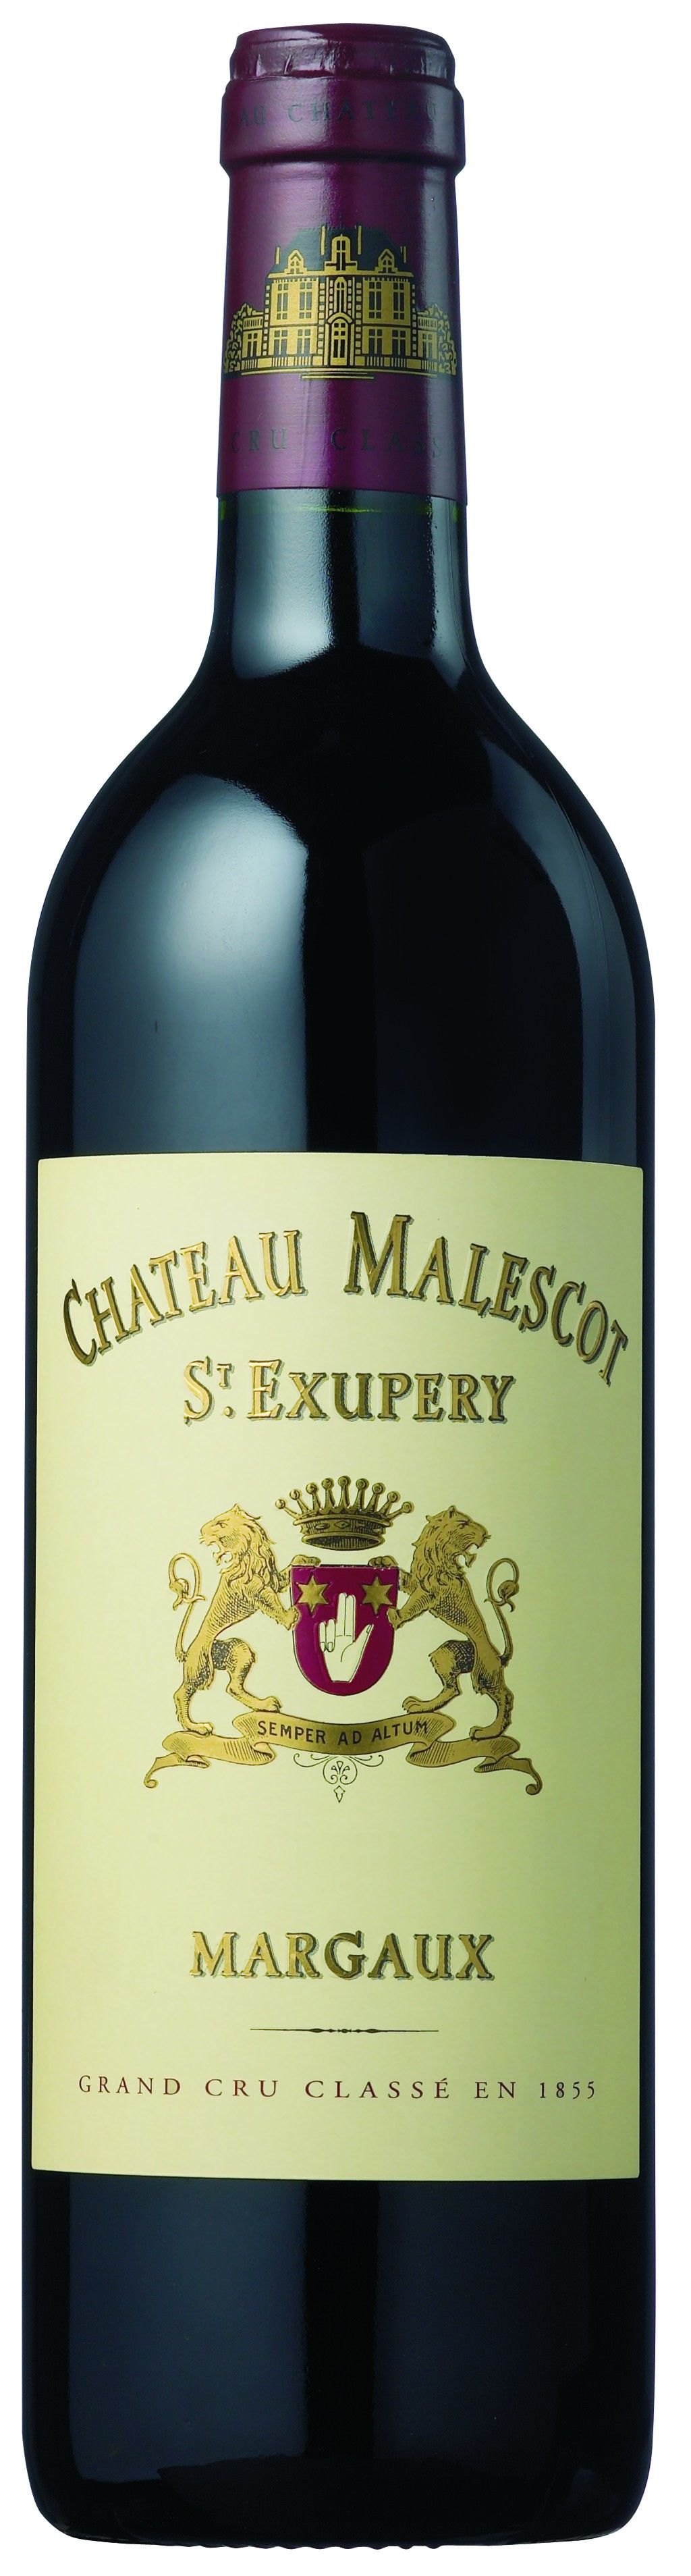 Chateau Malescot-St-Exupery, 1999